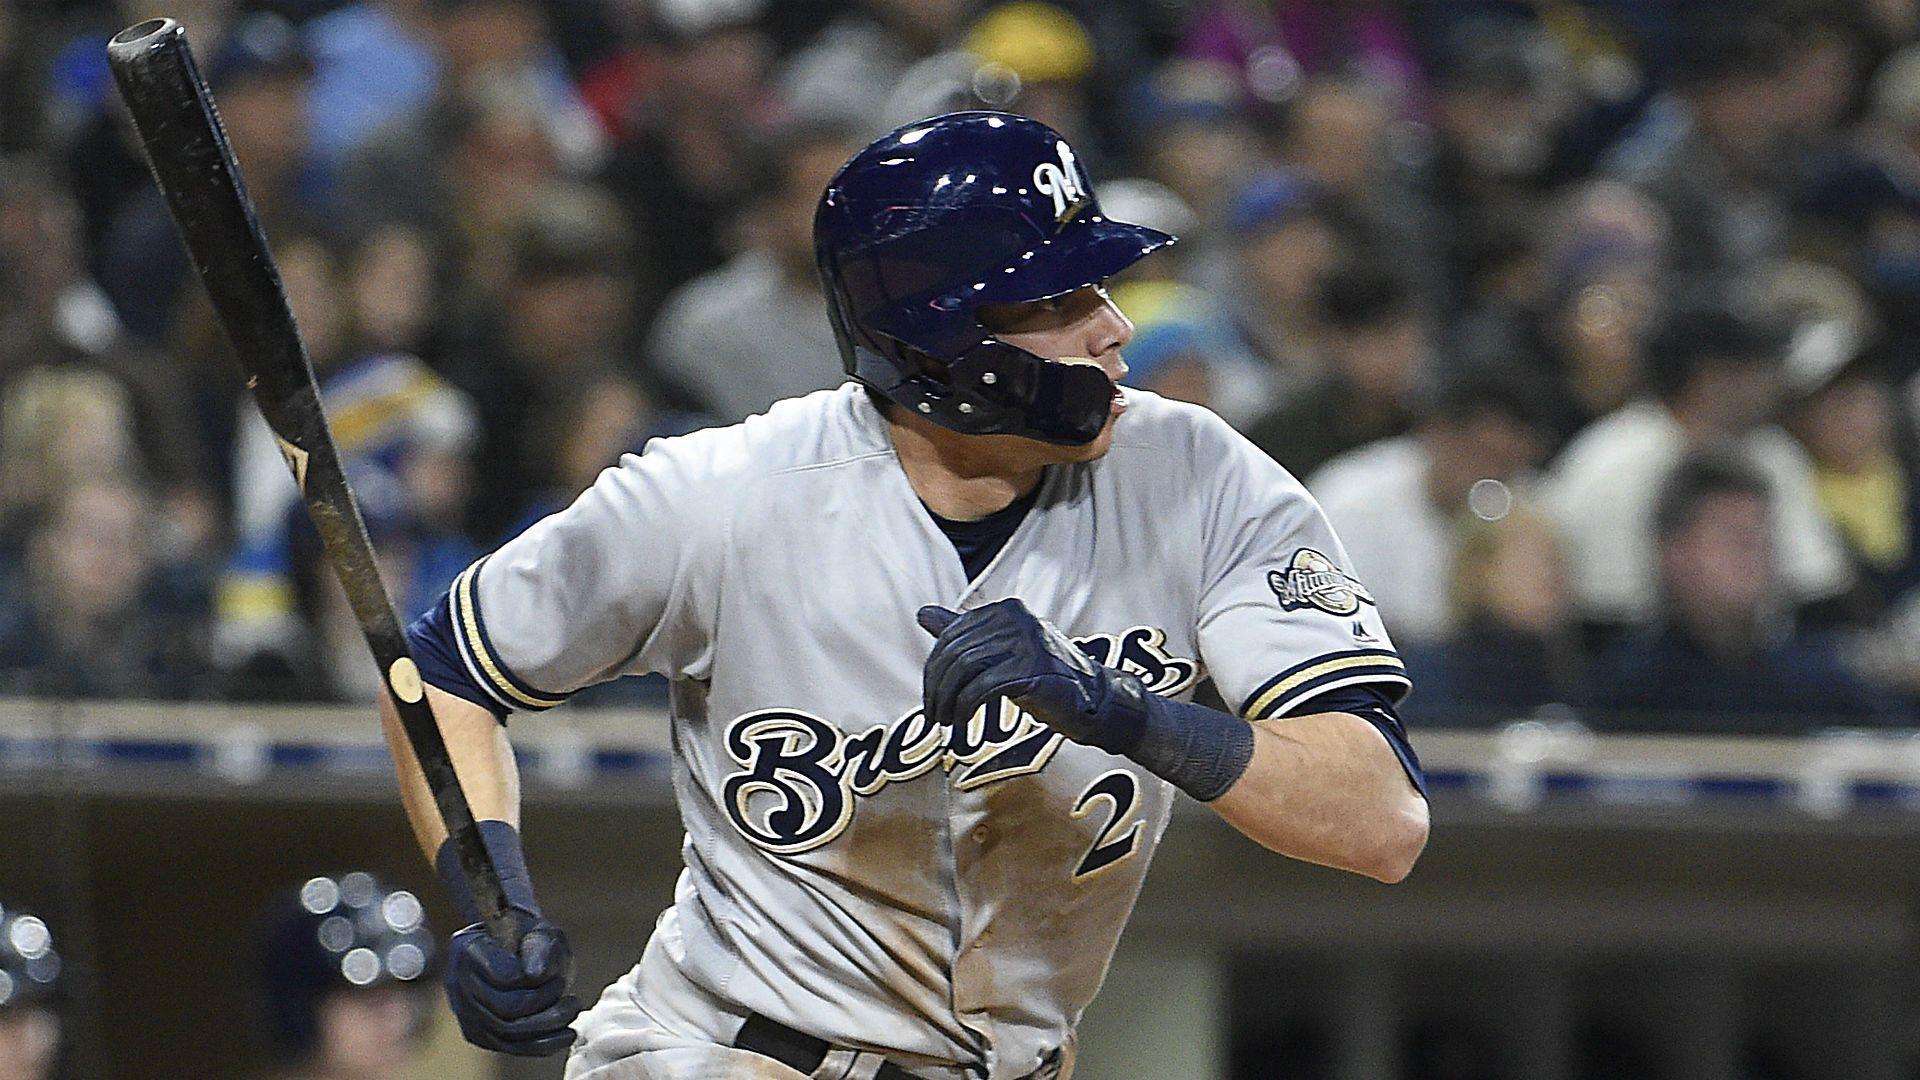 Brewers outfielder Yelich leaves game with lower back tightness.